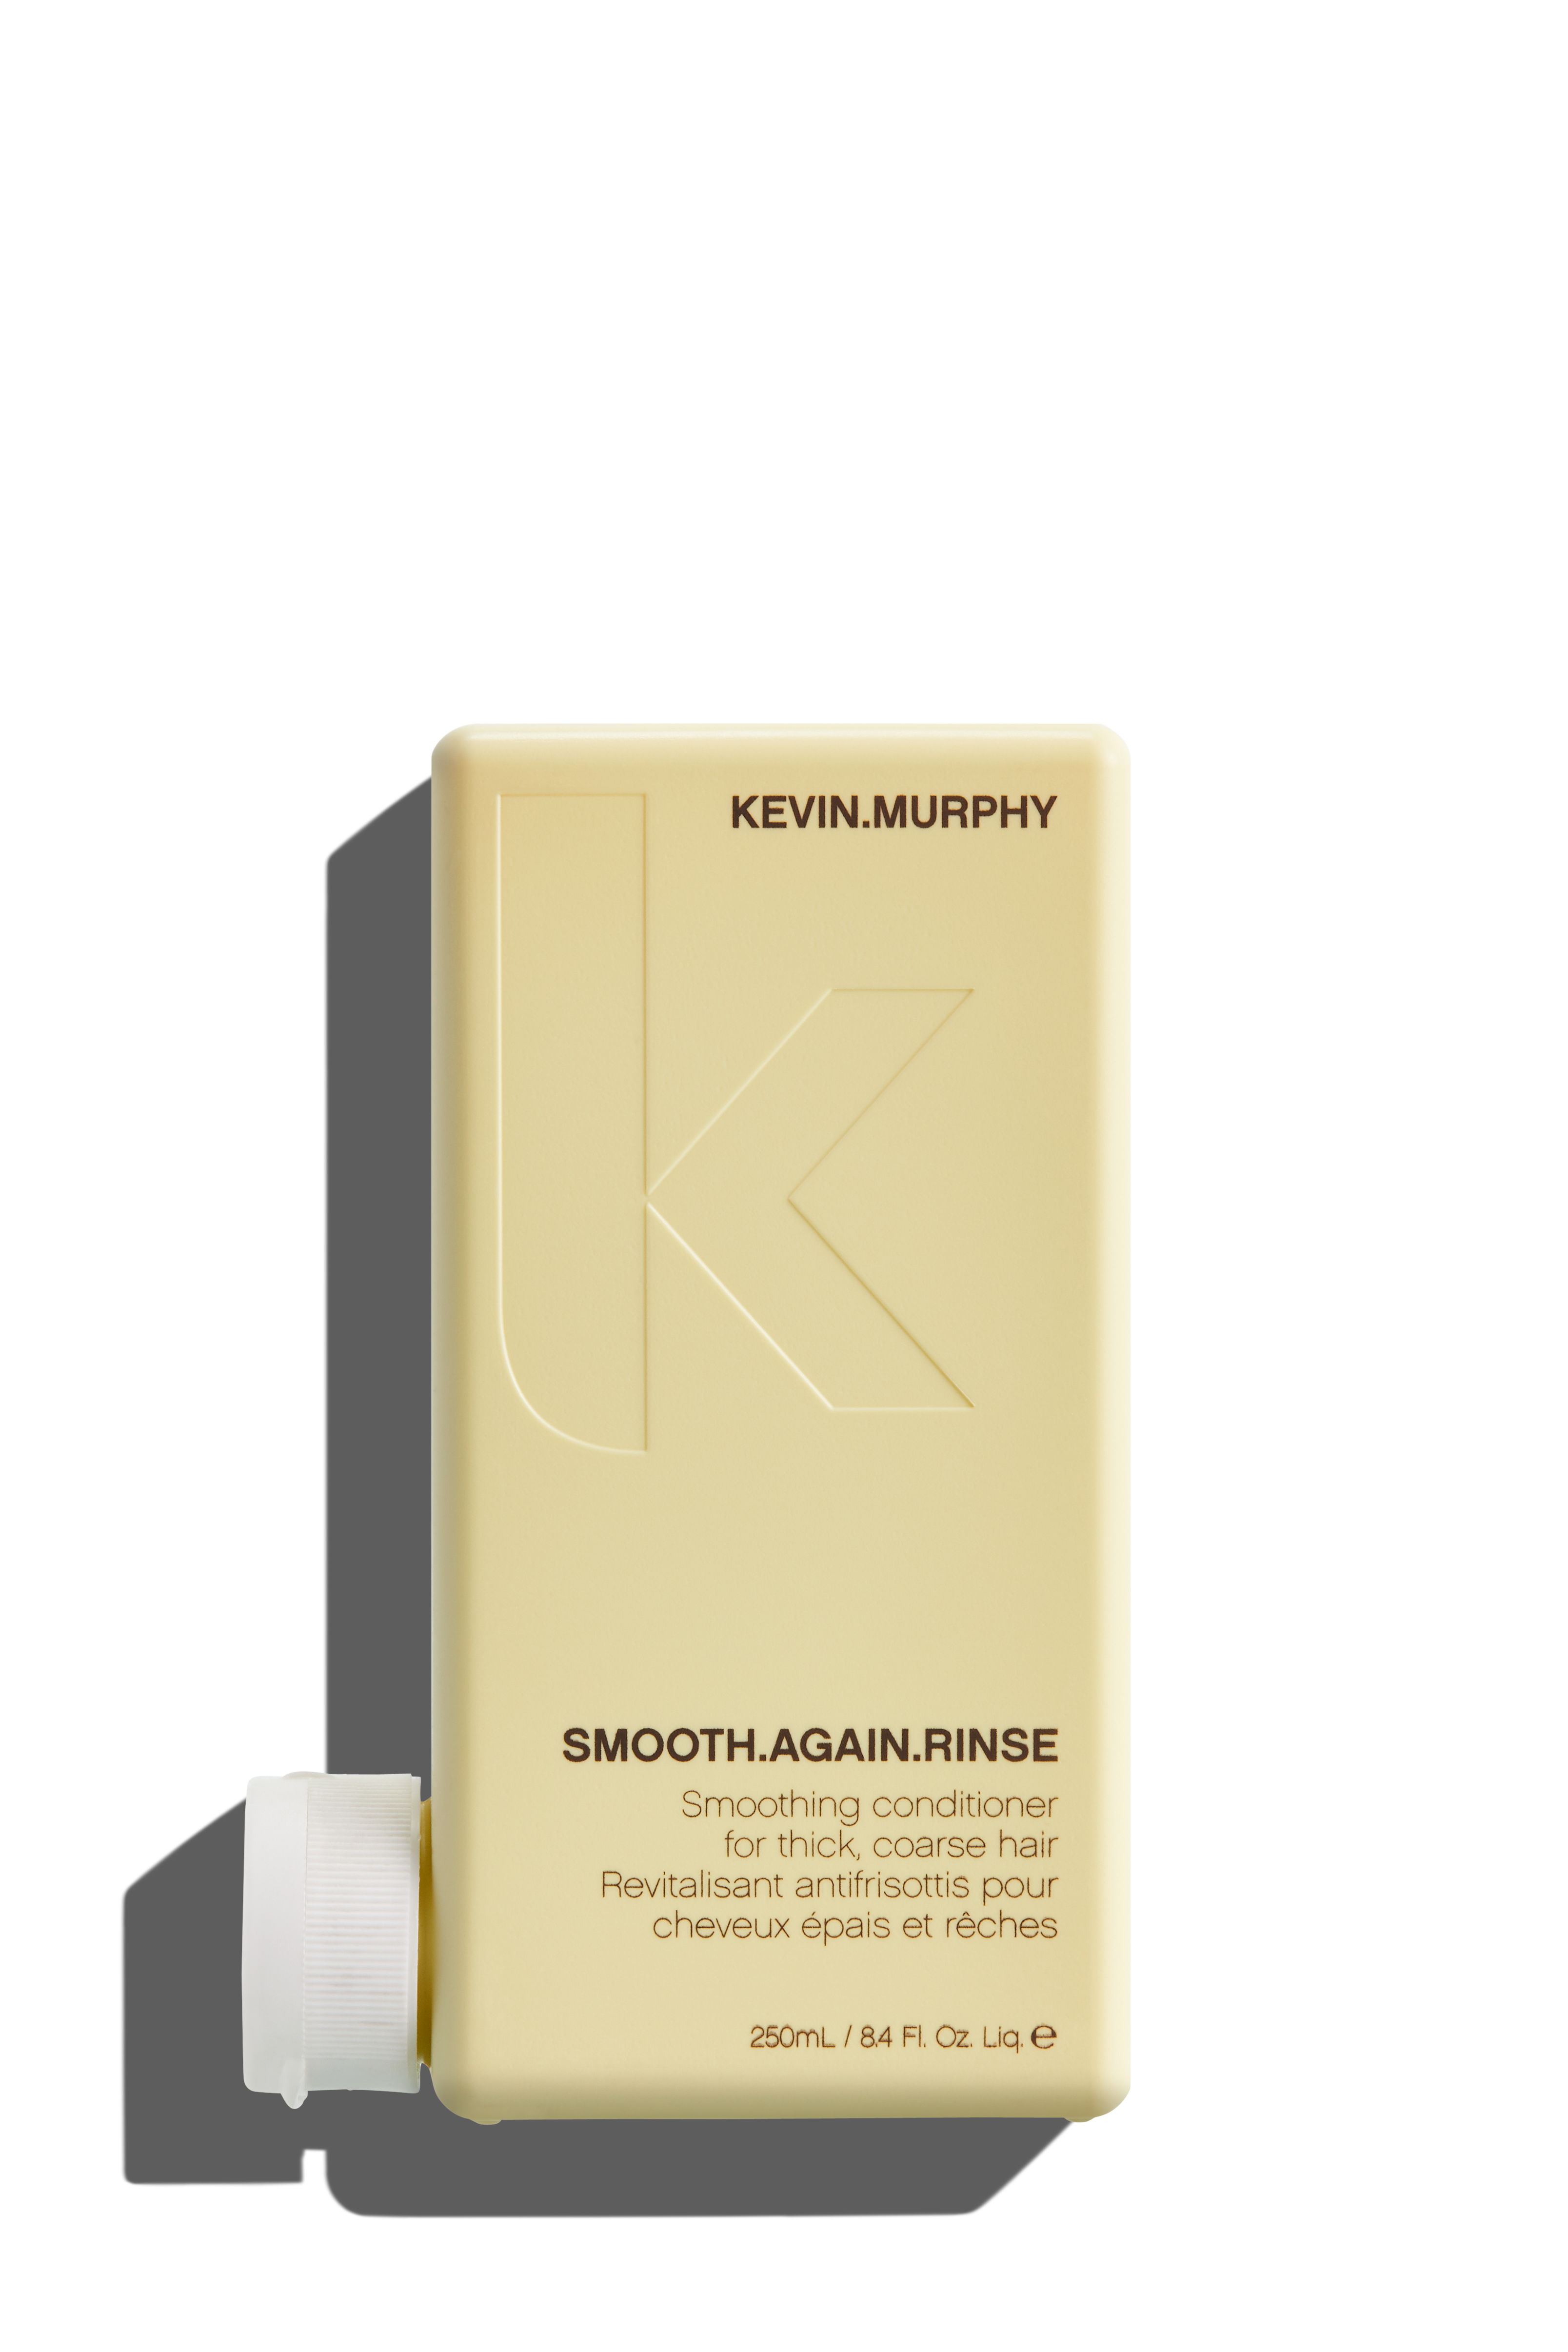 Kevin Murphy SMOOTH.AGAIN.RINSE (Buy 3 Get 1 Free Mix & Match)